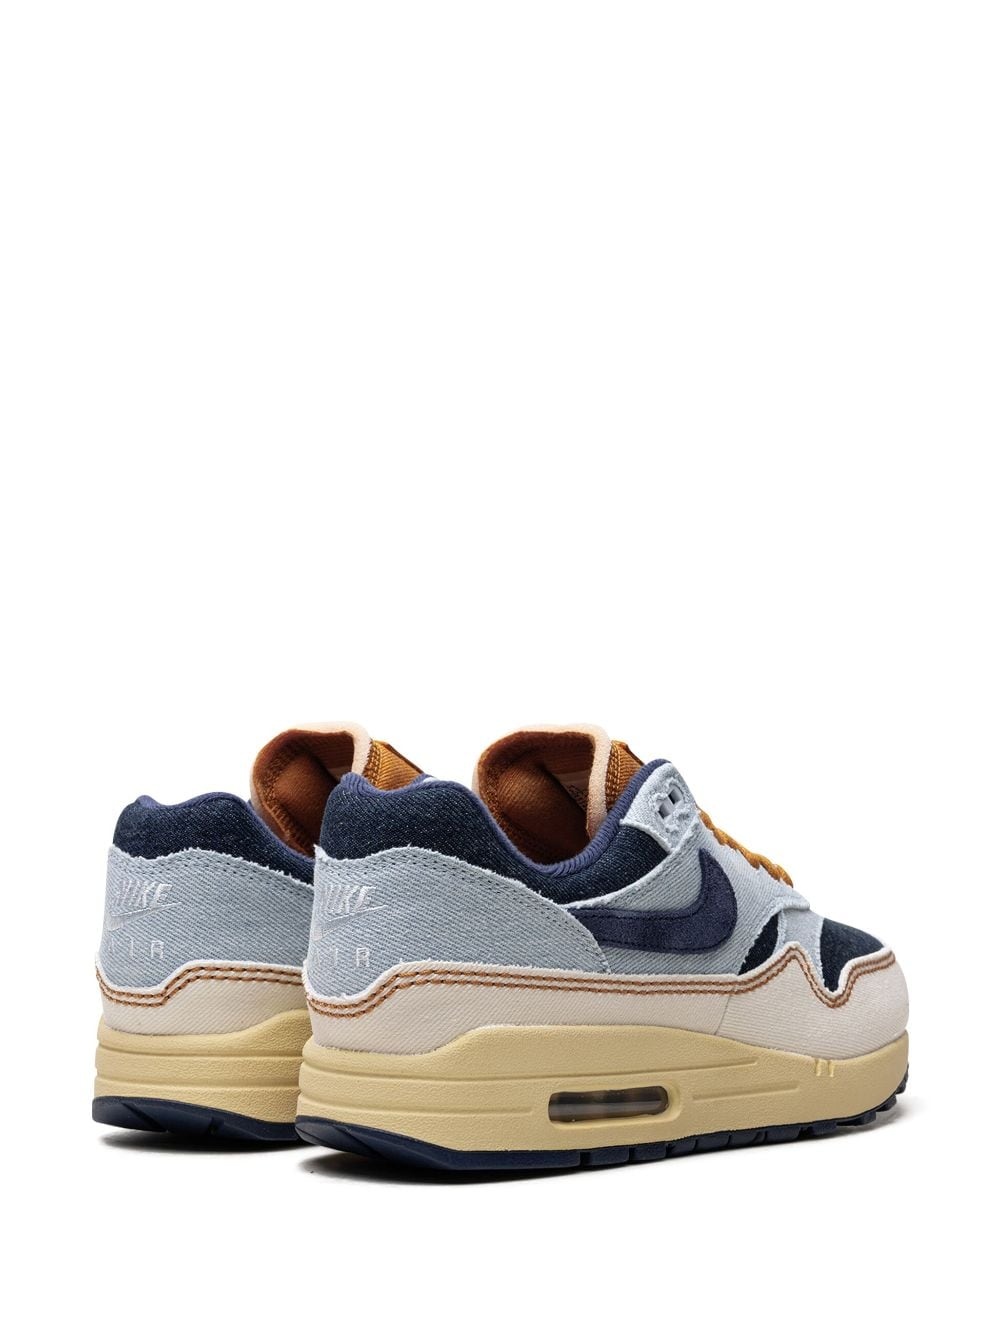 Air Max 1 '87 "Aura/Midnight Navy/Pale Ivory" sneakers - 3